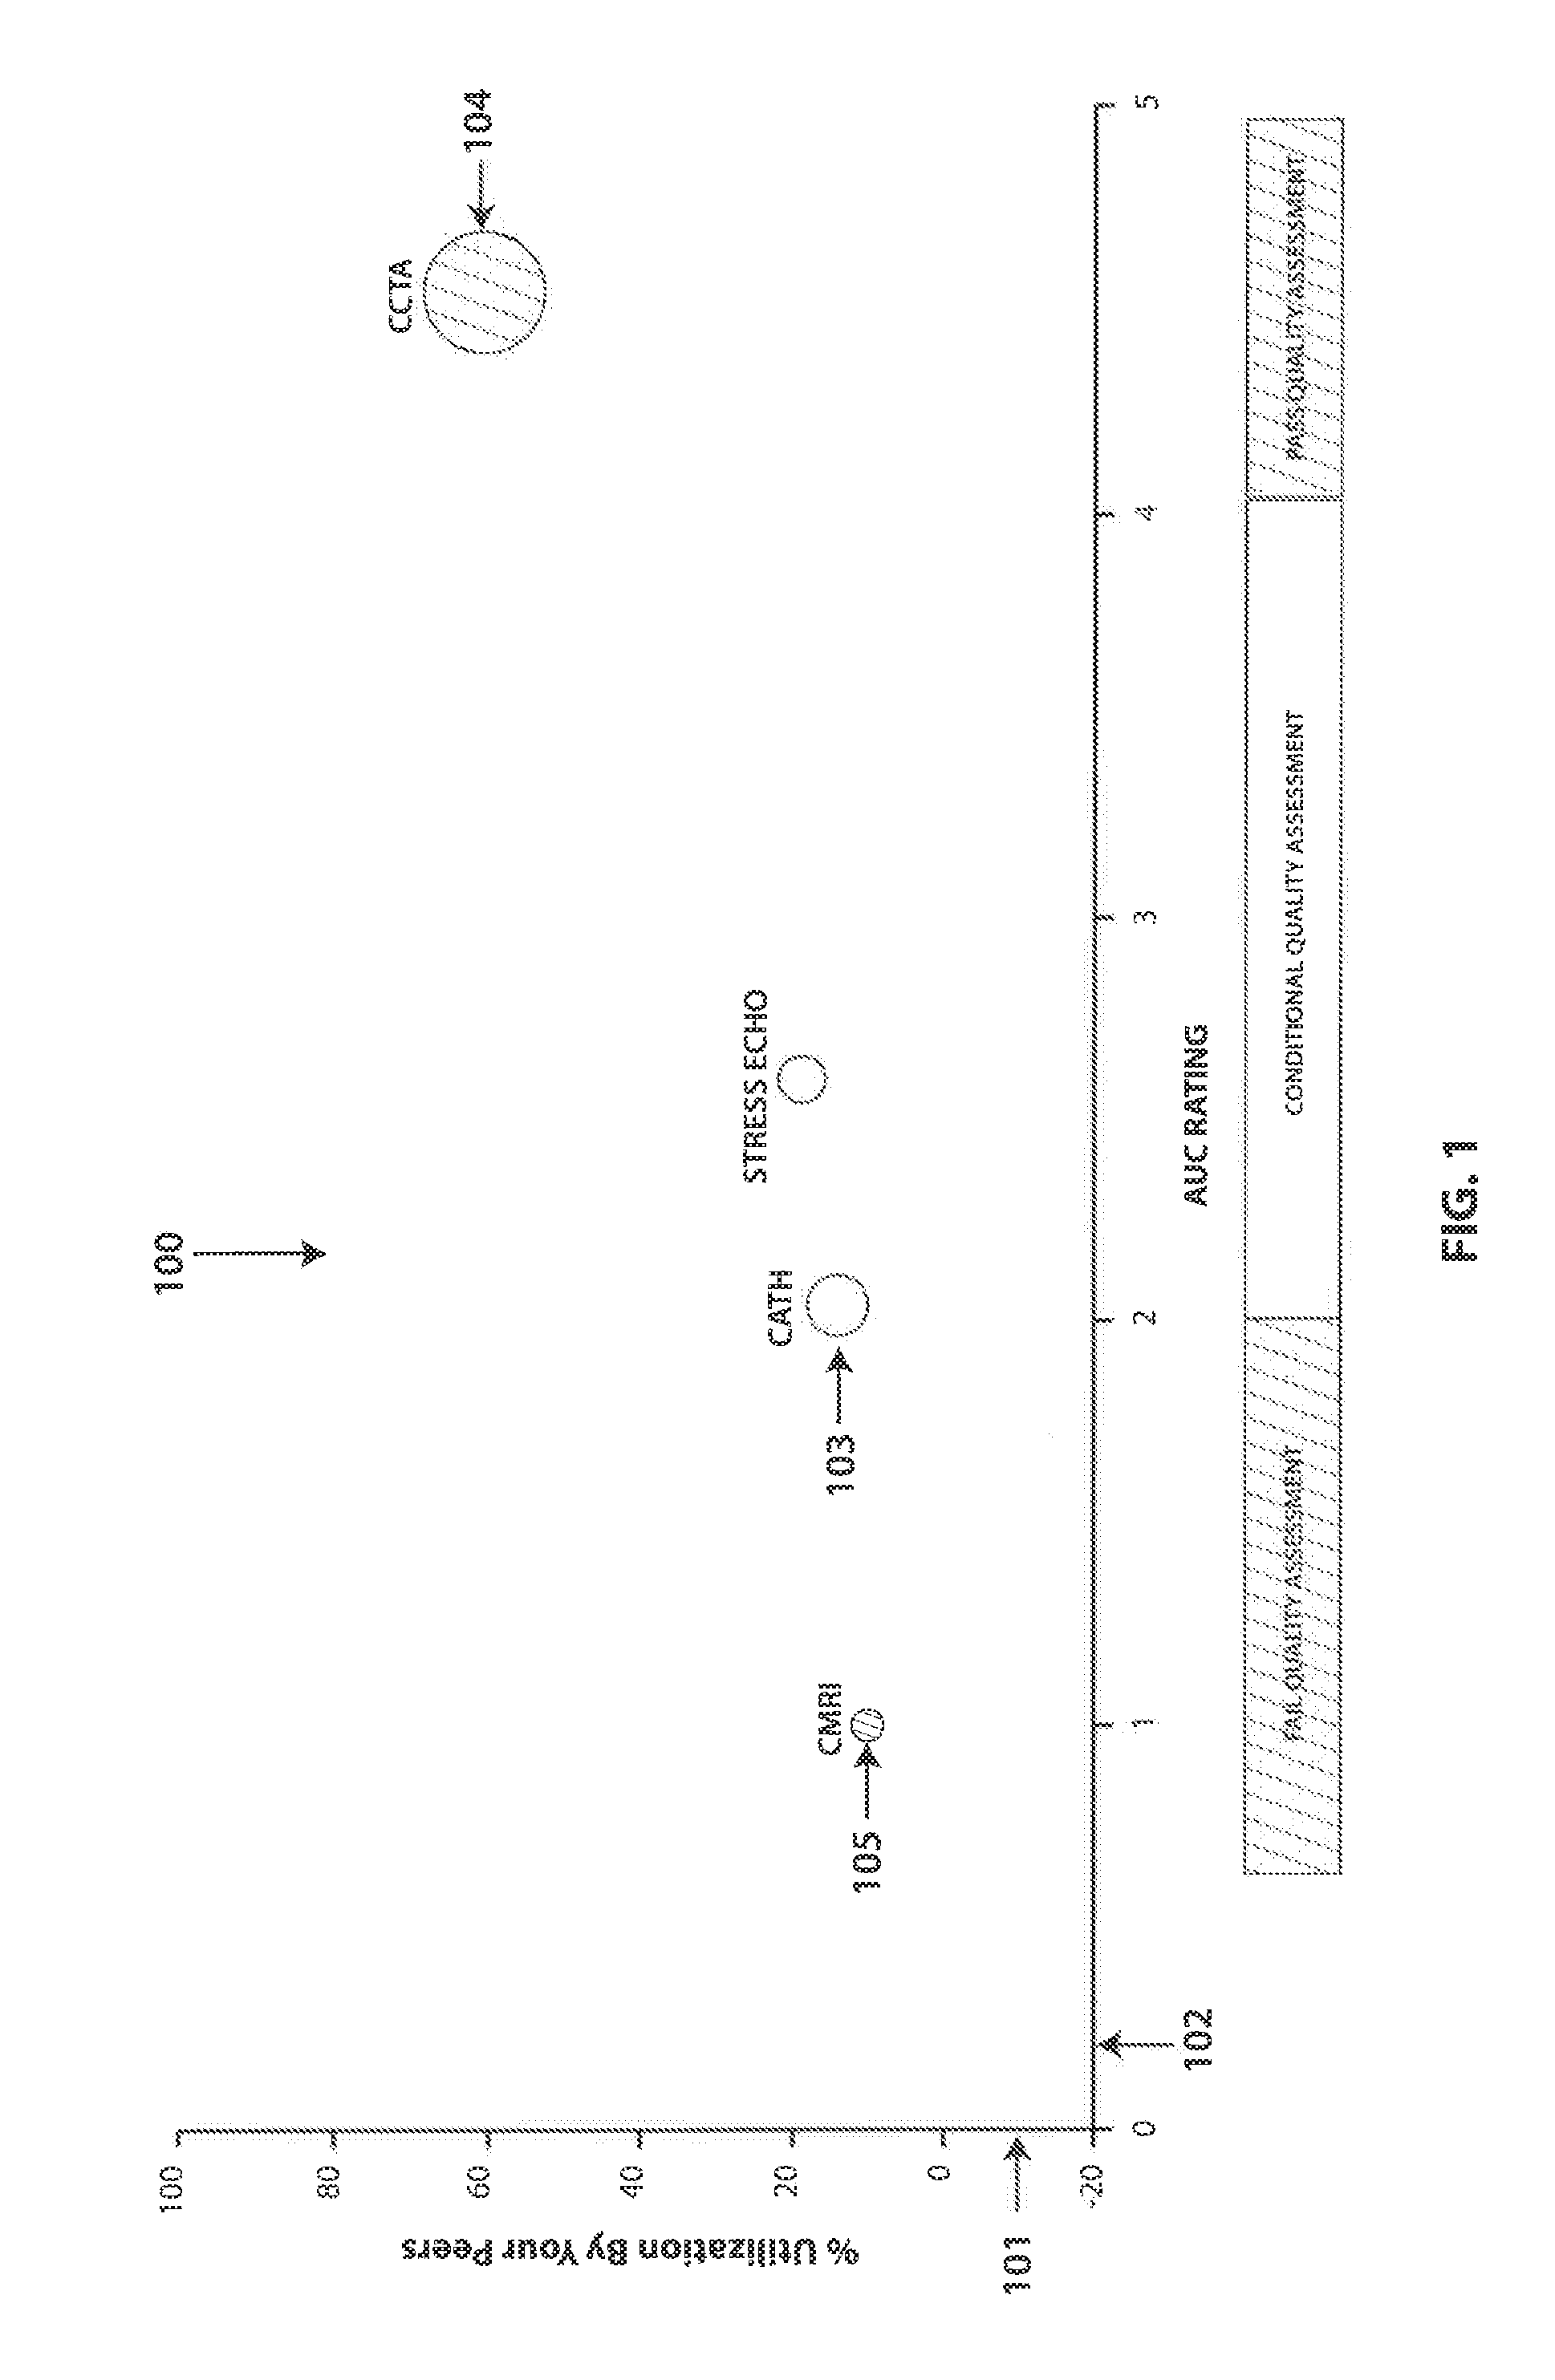 System and method for providing a medical diagnostic concordance